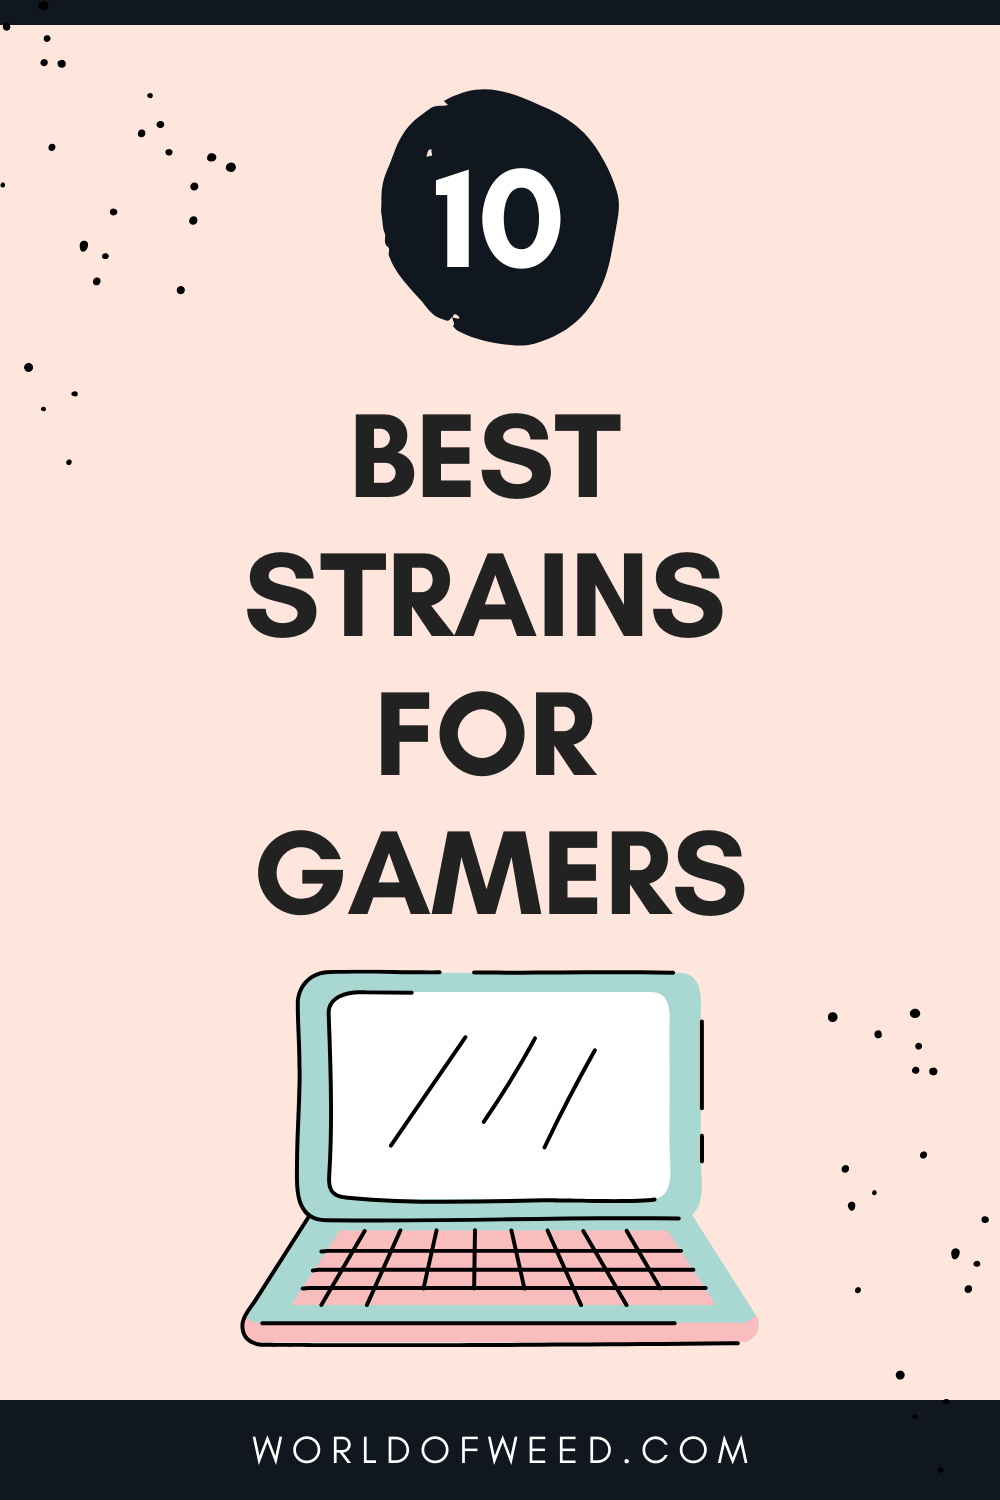 10 Best Strains for Gamers